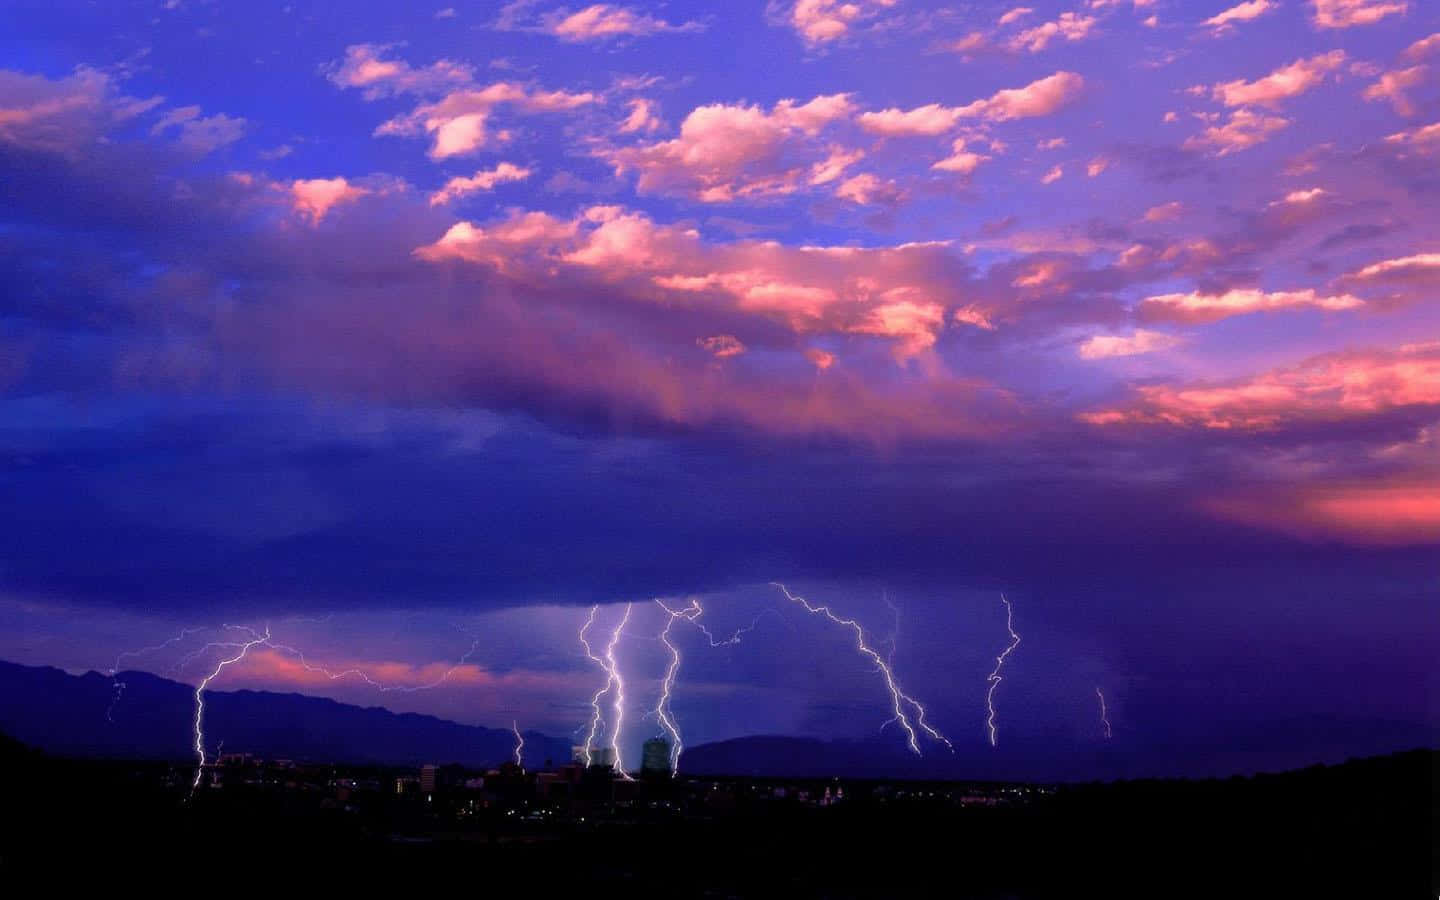 A powerful summer thunderstorm rolls in